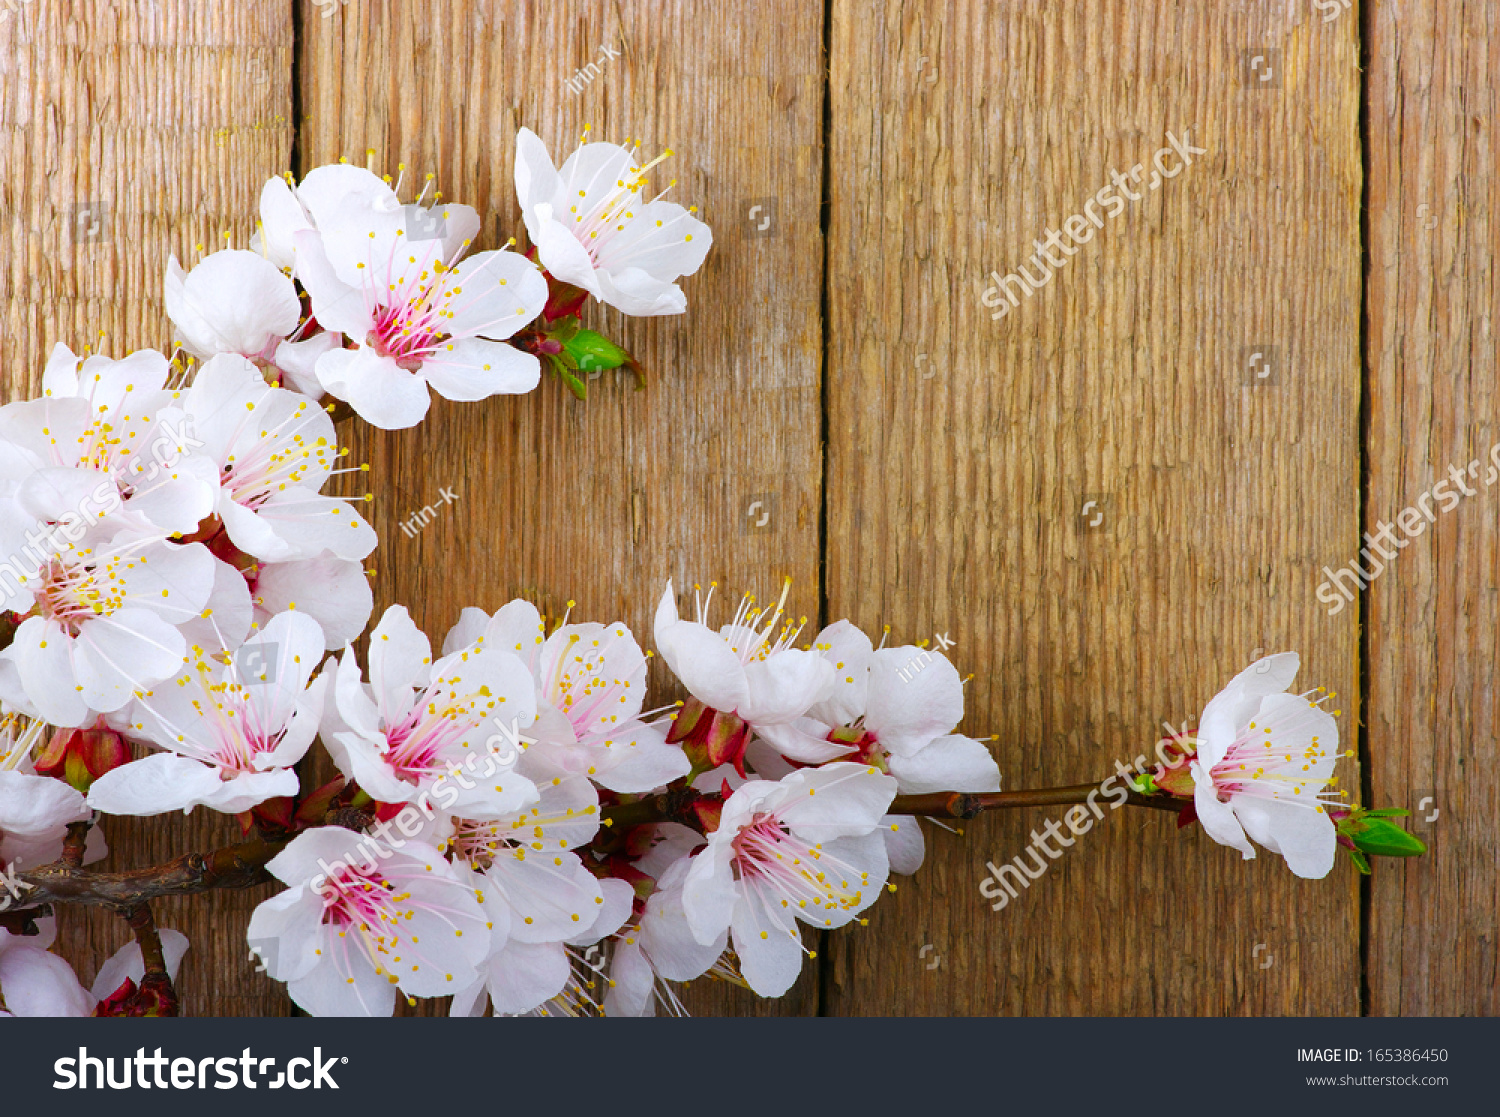 PowerPoint Template Cherry Blossom Spring Flower On inmkpnlmh 